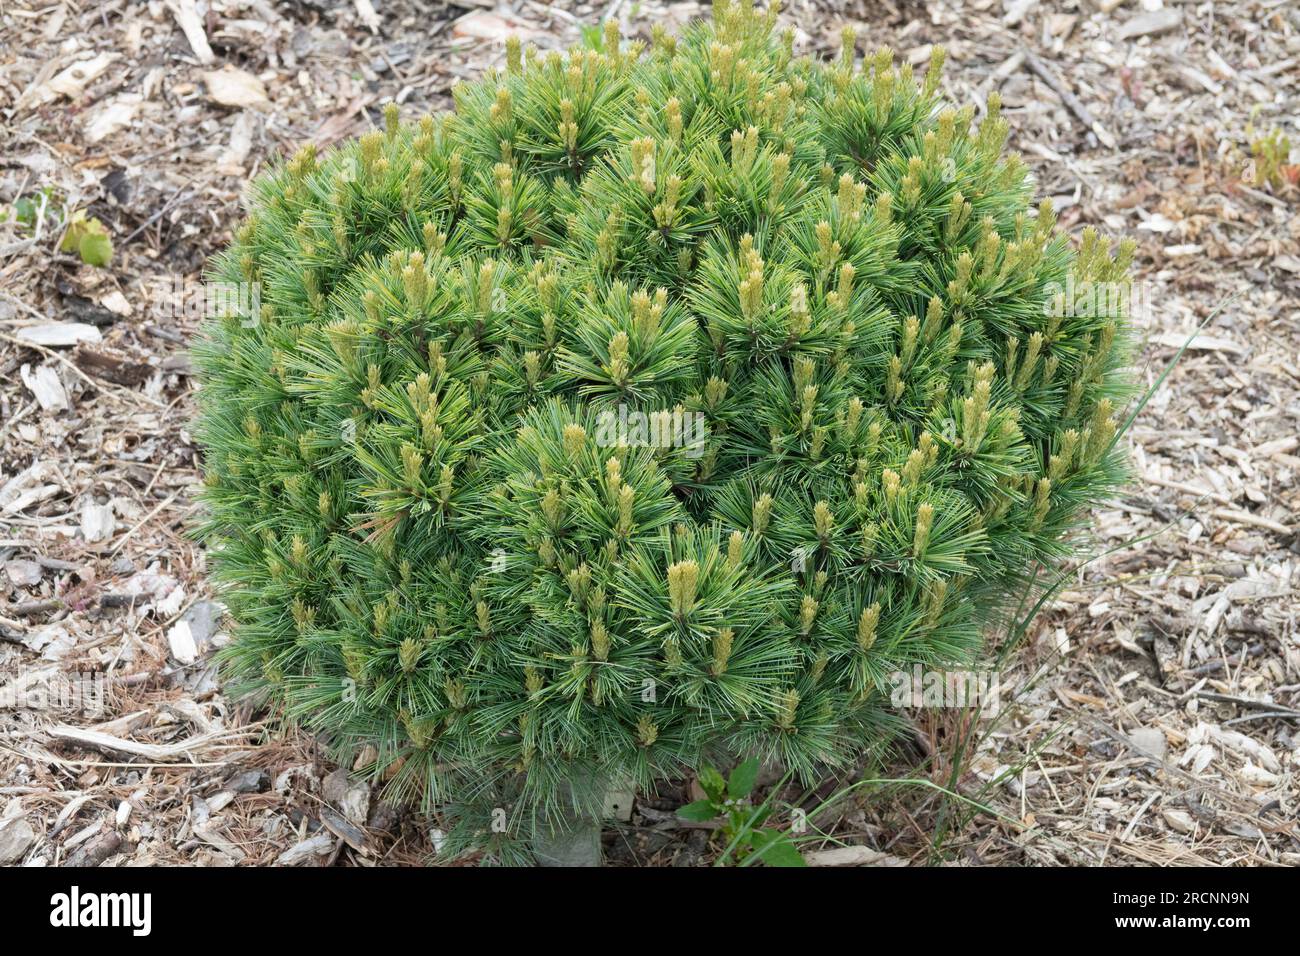 Dwarf, Pinus strobus 'Mary Sweeny' Slow growing, Pine low Compact Tree Cultivar Conifer Eastern White Pine Shaped Weymouth Pine Small Specimen Spring Stock Photo